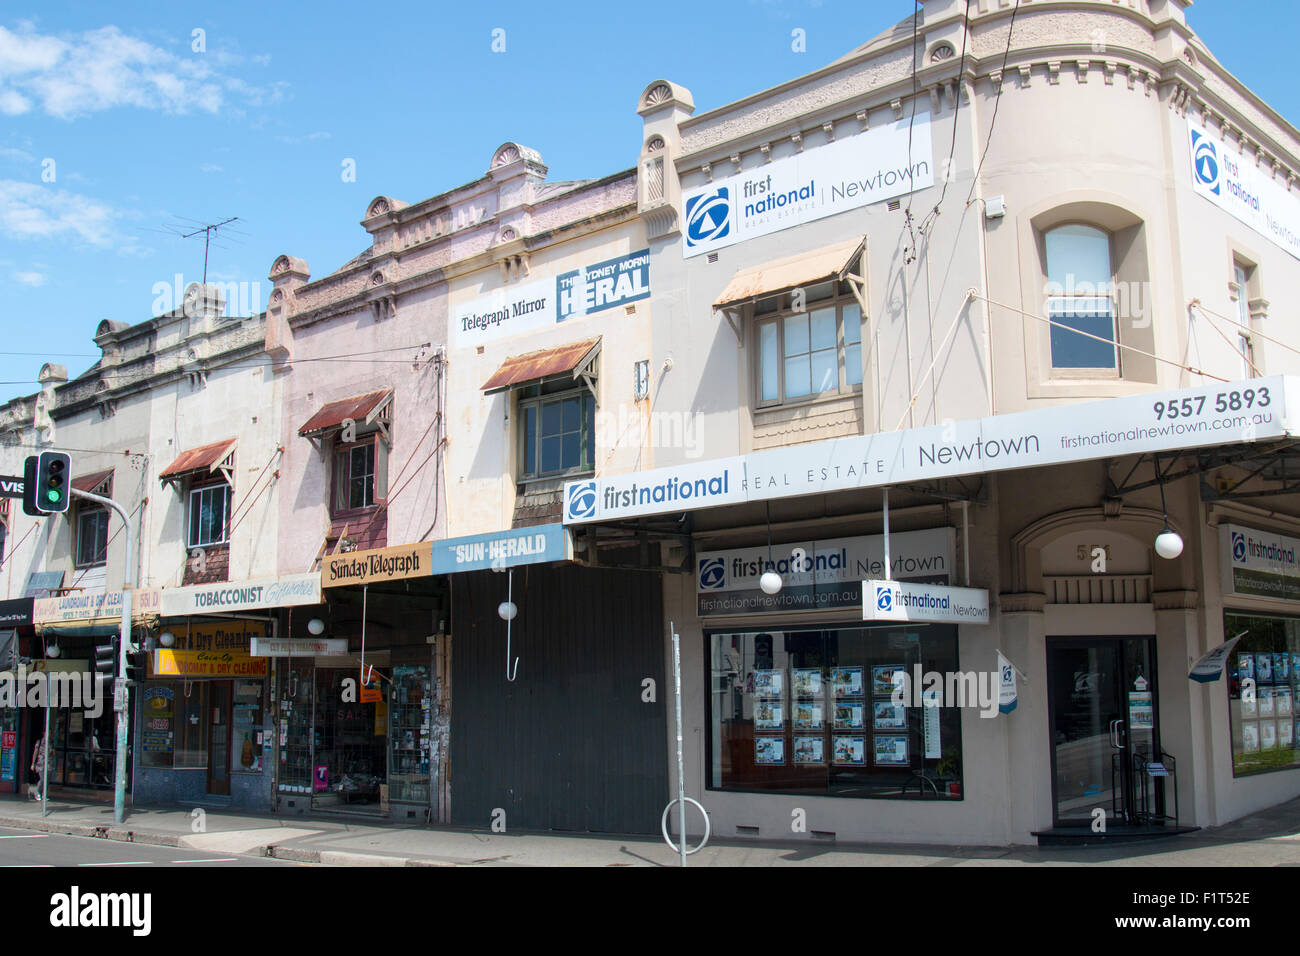 shops,stores and real estate agency on king street, Newtown, suburb of Sydney Australia Stock Photo